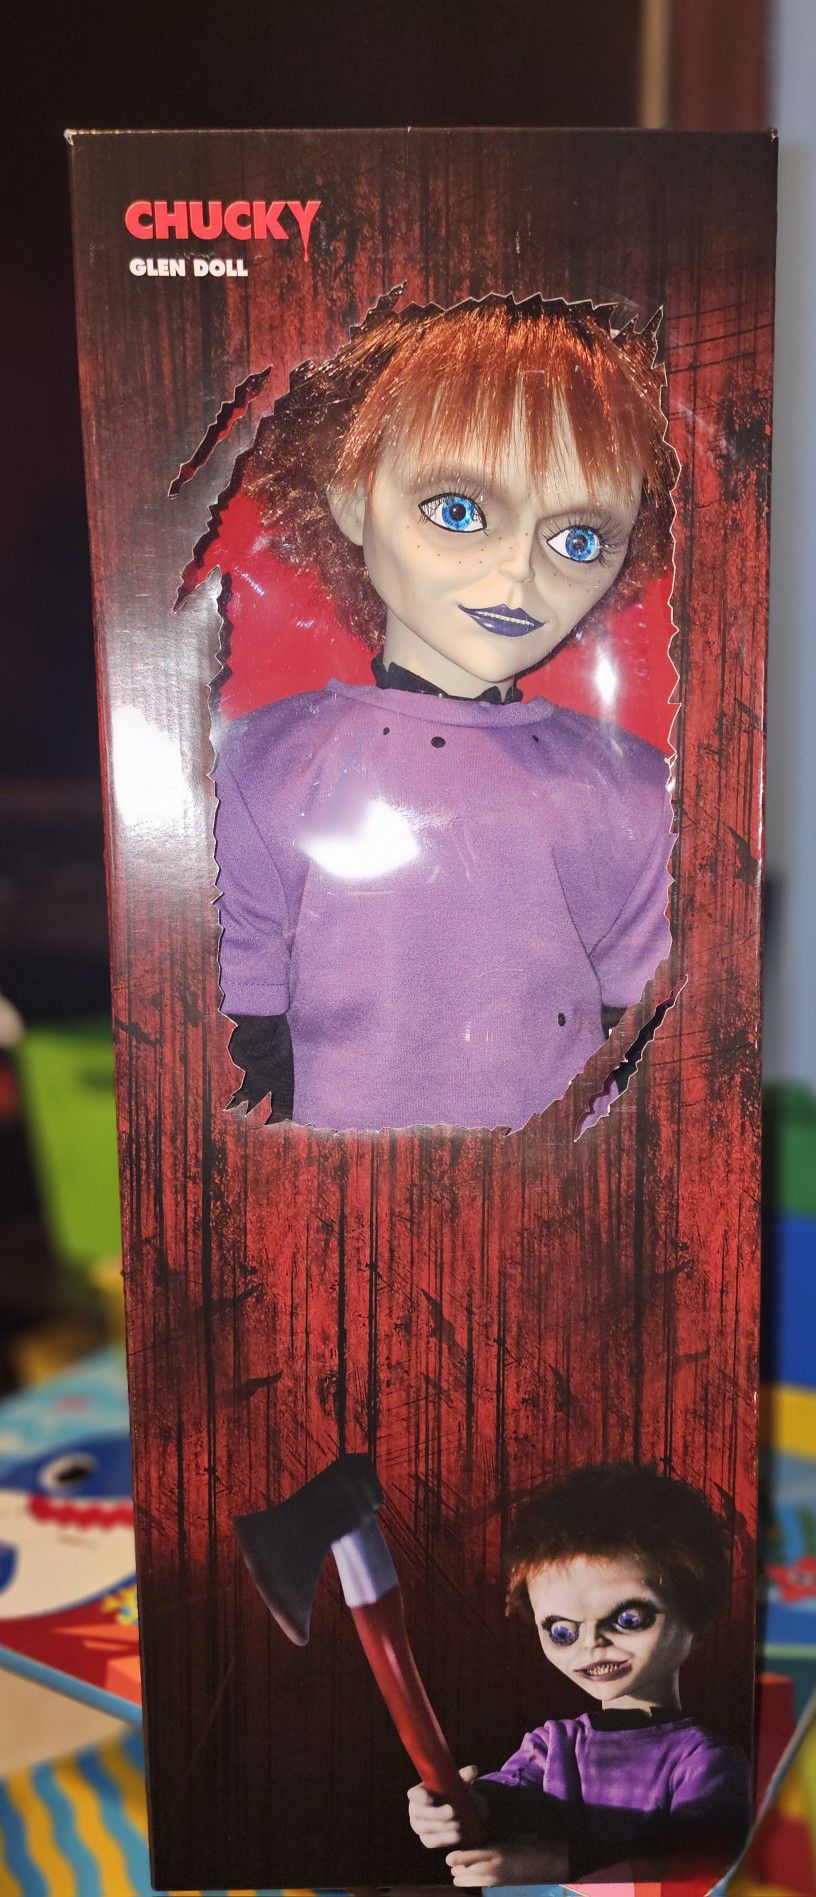 Brand New! Good Guys Seed Of Chucky 24-Inch Glen Doll (Unopened)